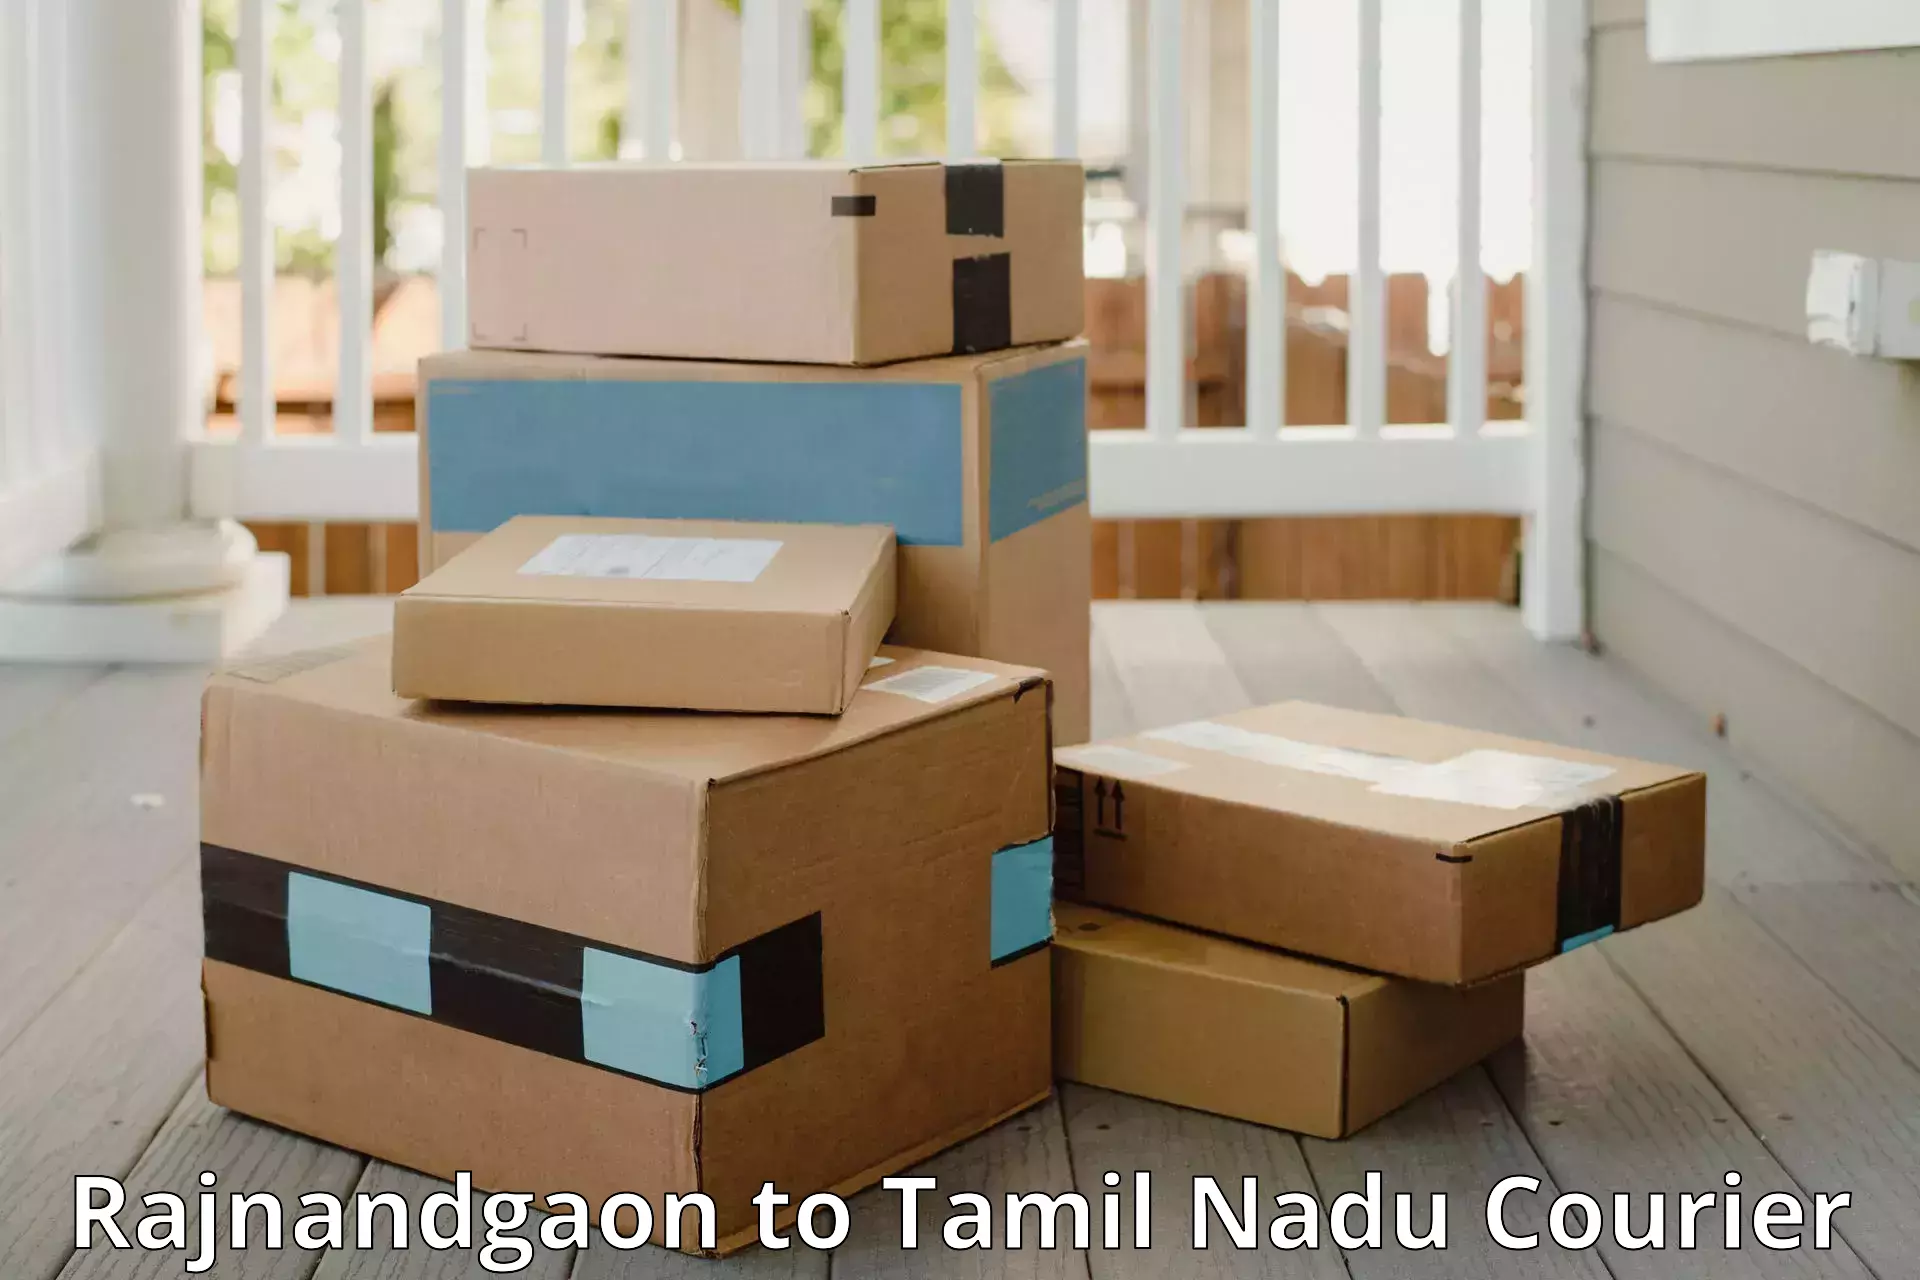 Express baggage shipping Rajnandgaon to Sri Ramachandra Institute of Higher Education and Research Chennai